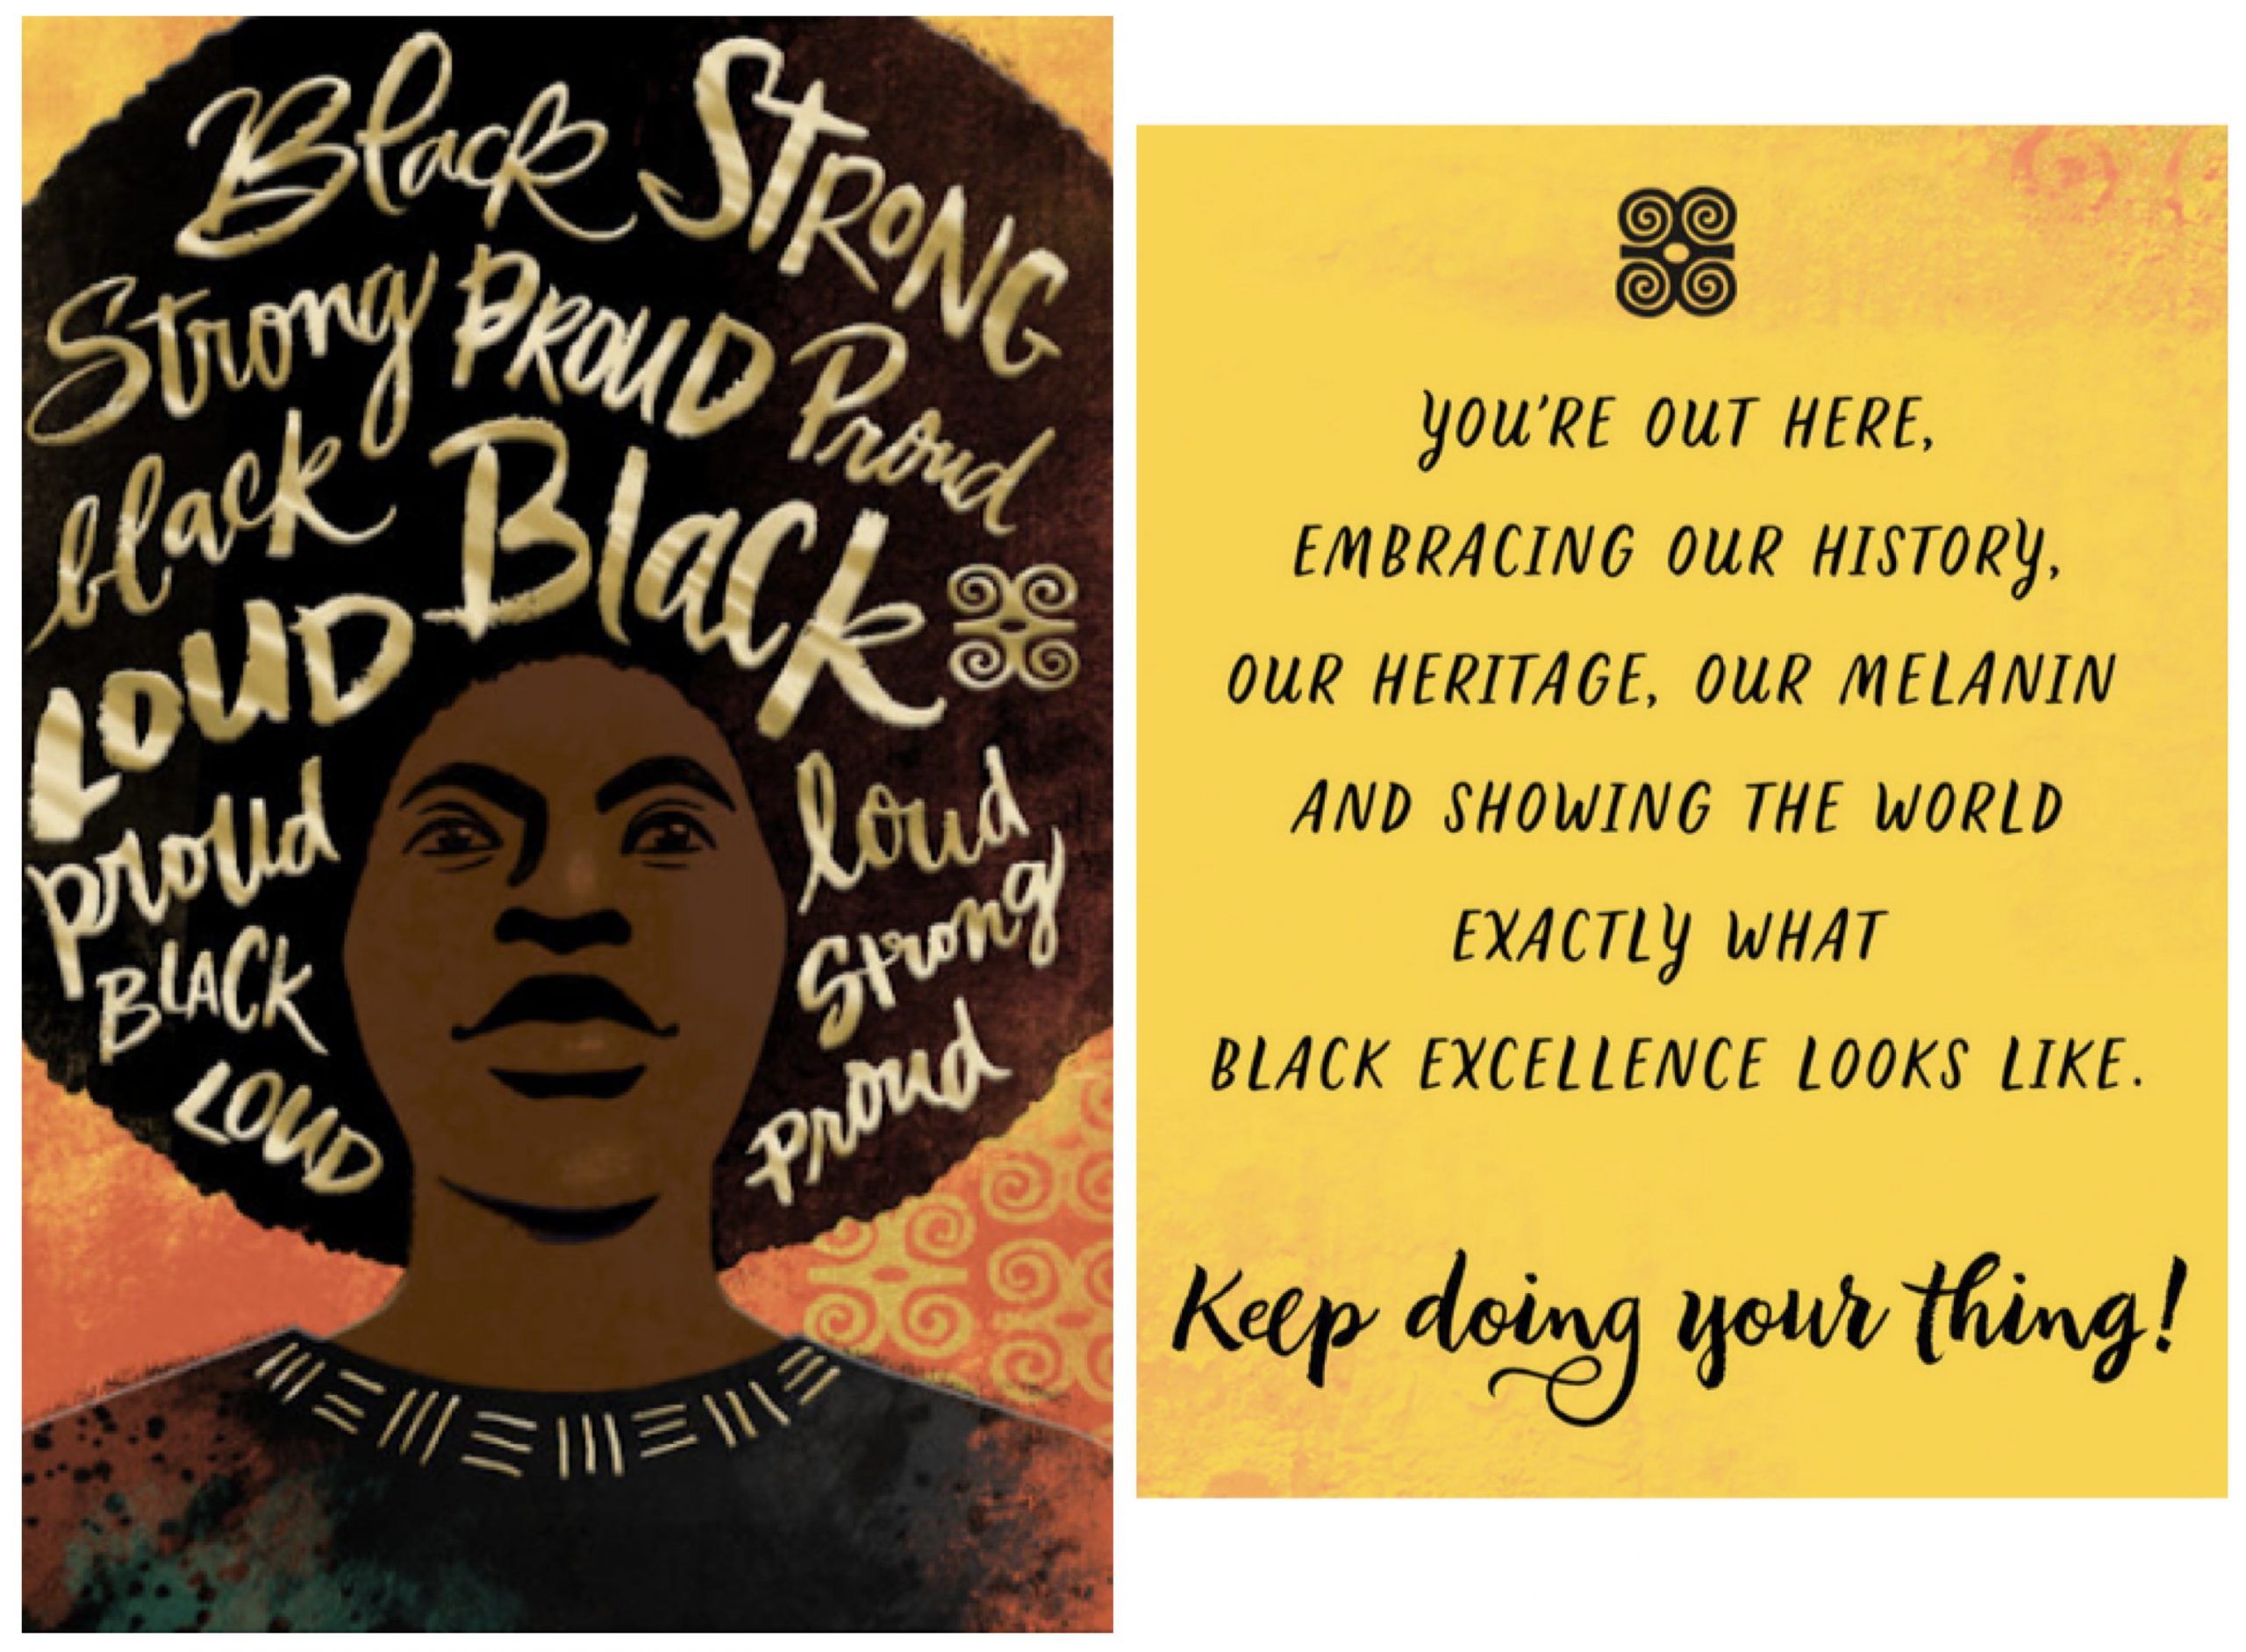 Greeting Card: Outer text, "Black Strong, Strong Proud, Black Loud Proud." Inner text, "You're out here, embracing our history, our heritage, our melanin and showing the world exactly what Black excellence looks like. Keep doing your thing!"